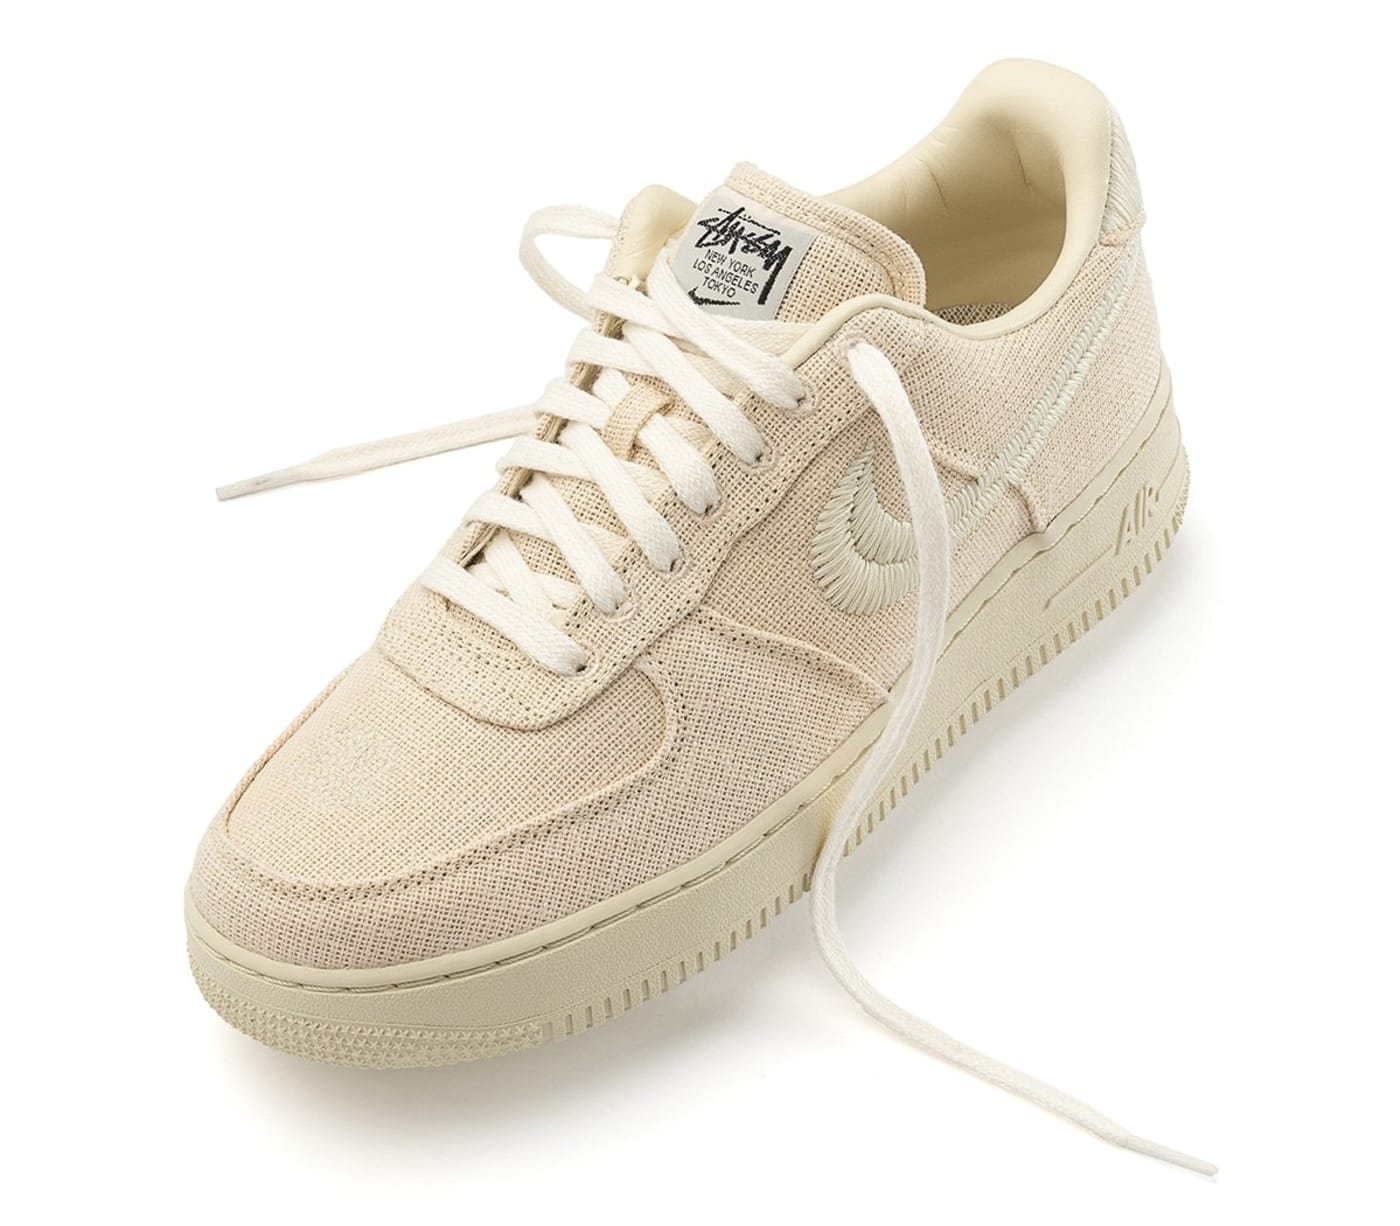 where can you buy air force 1